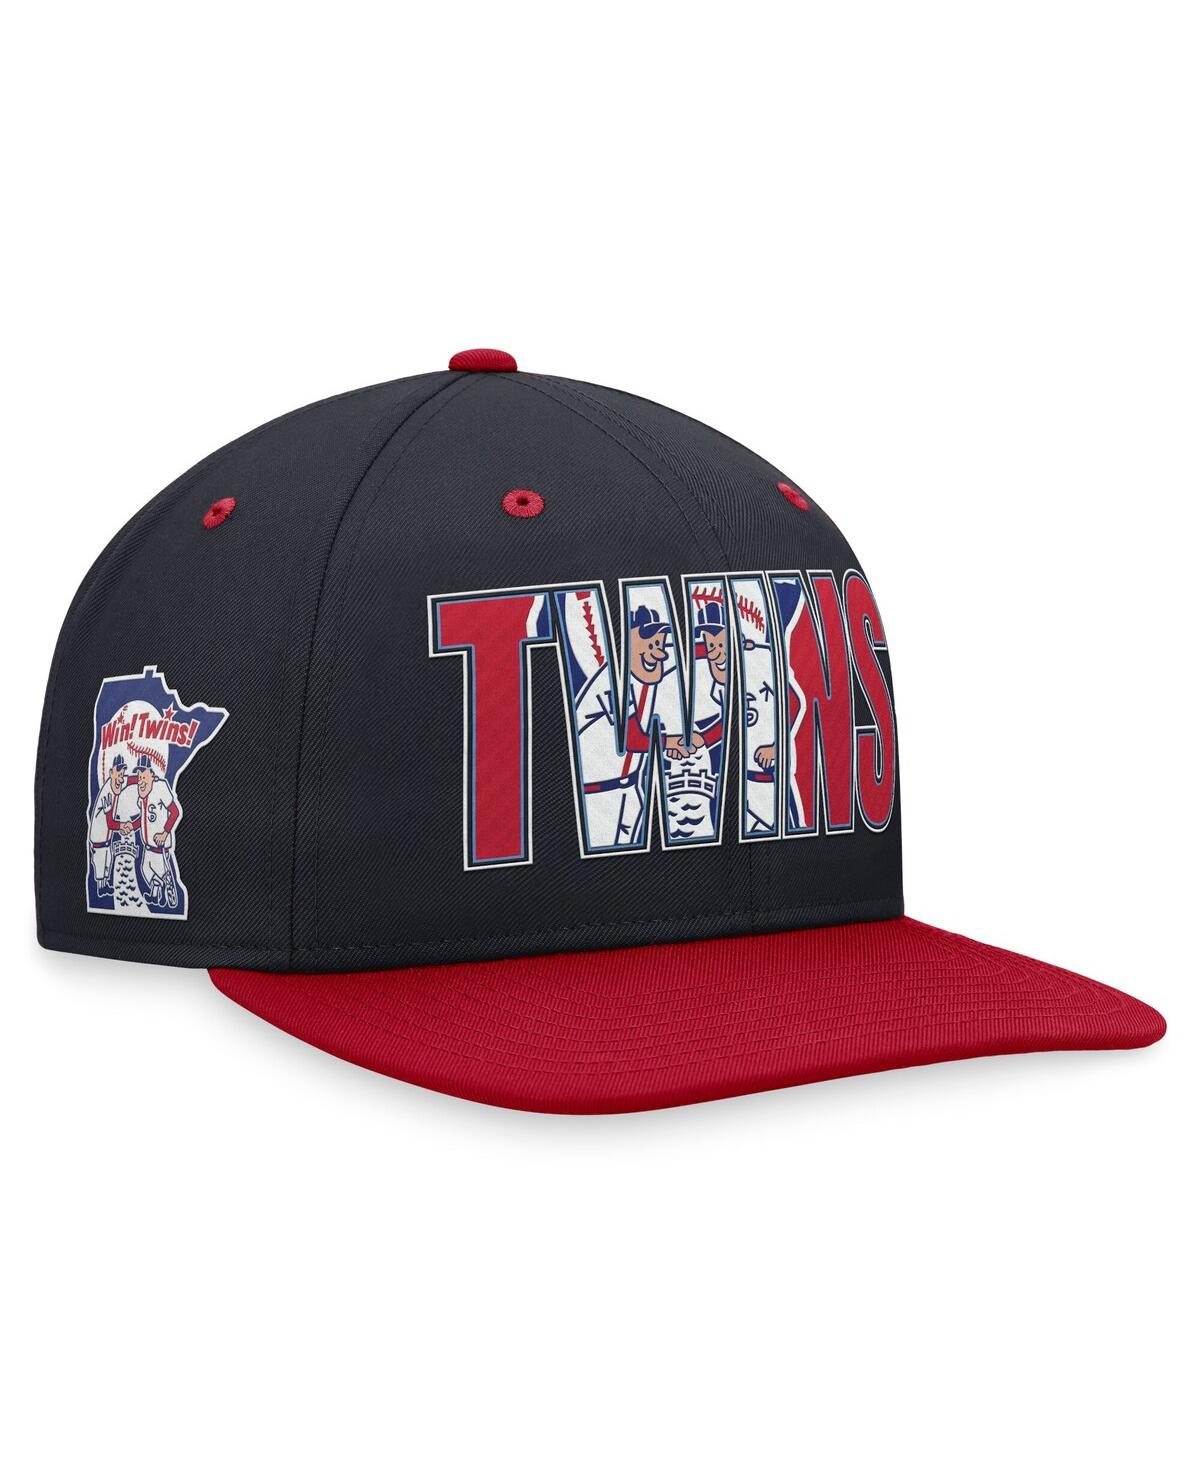 Nike Men's  Navy Minnesota Twins Cooperstown Collection Pro Snapback Hat